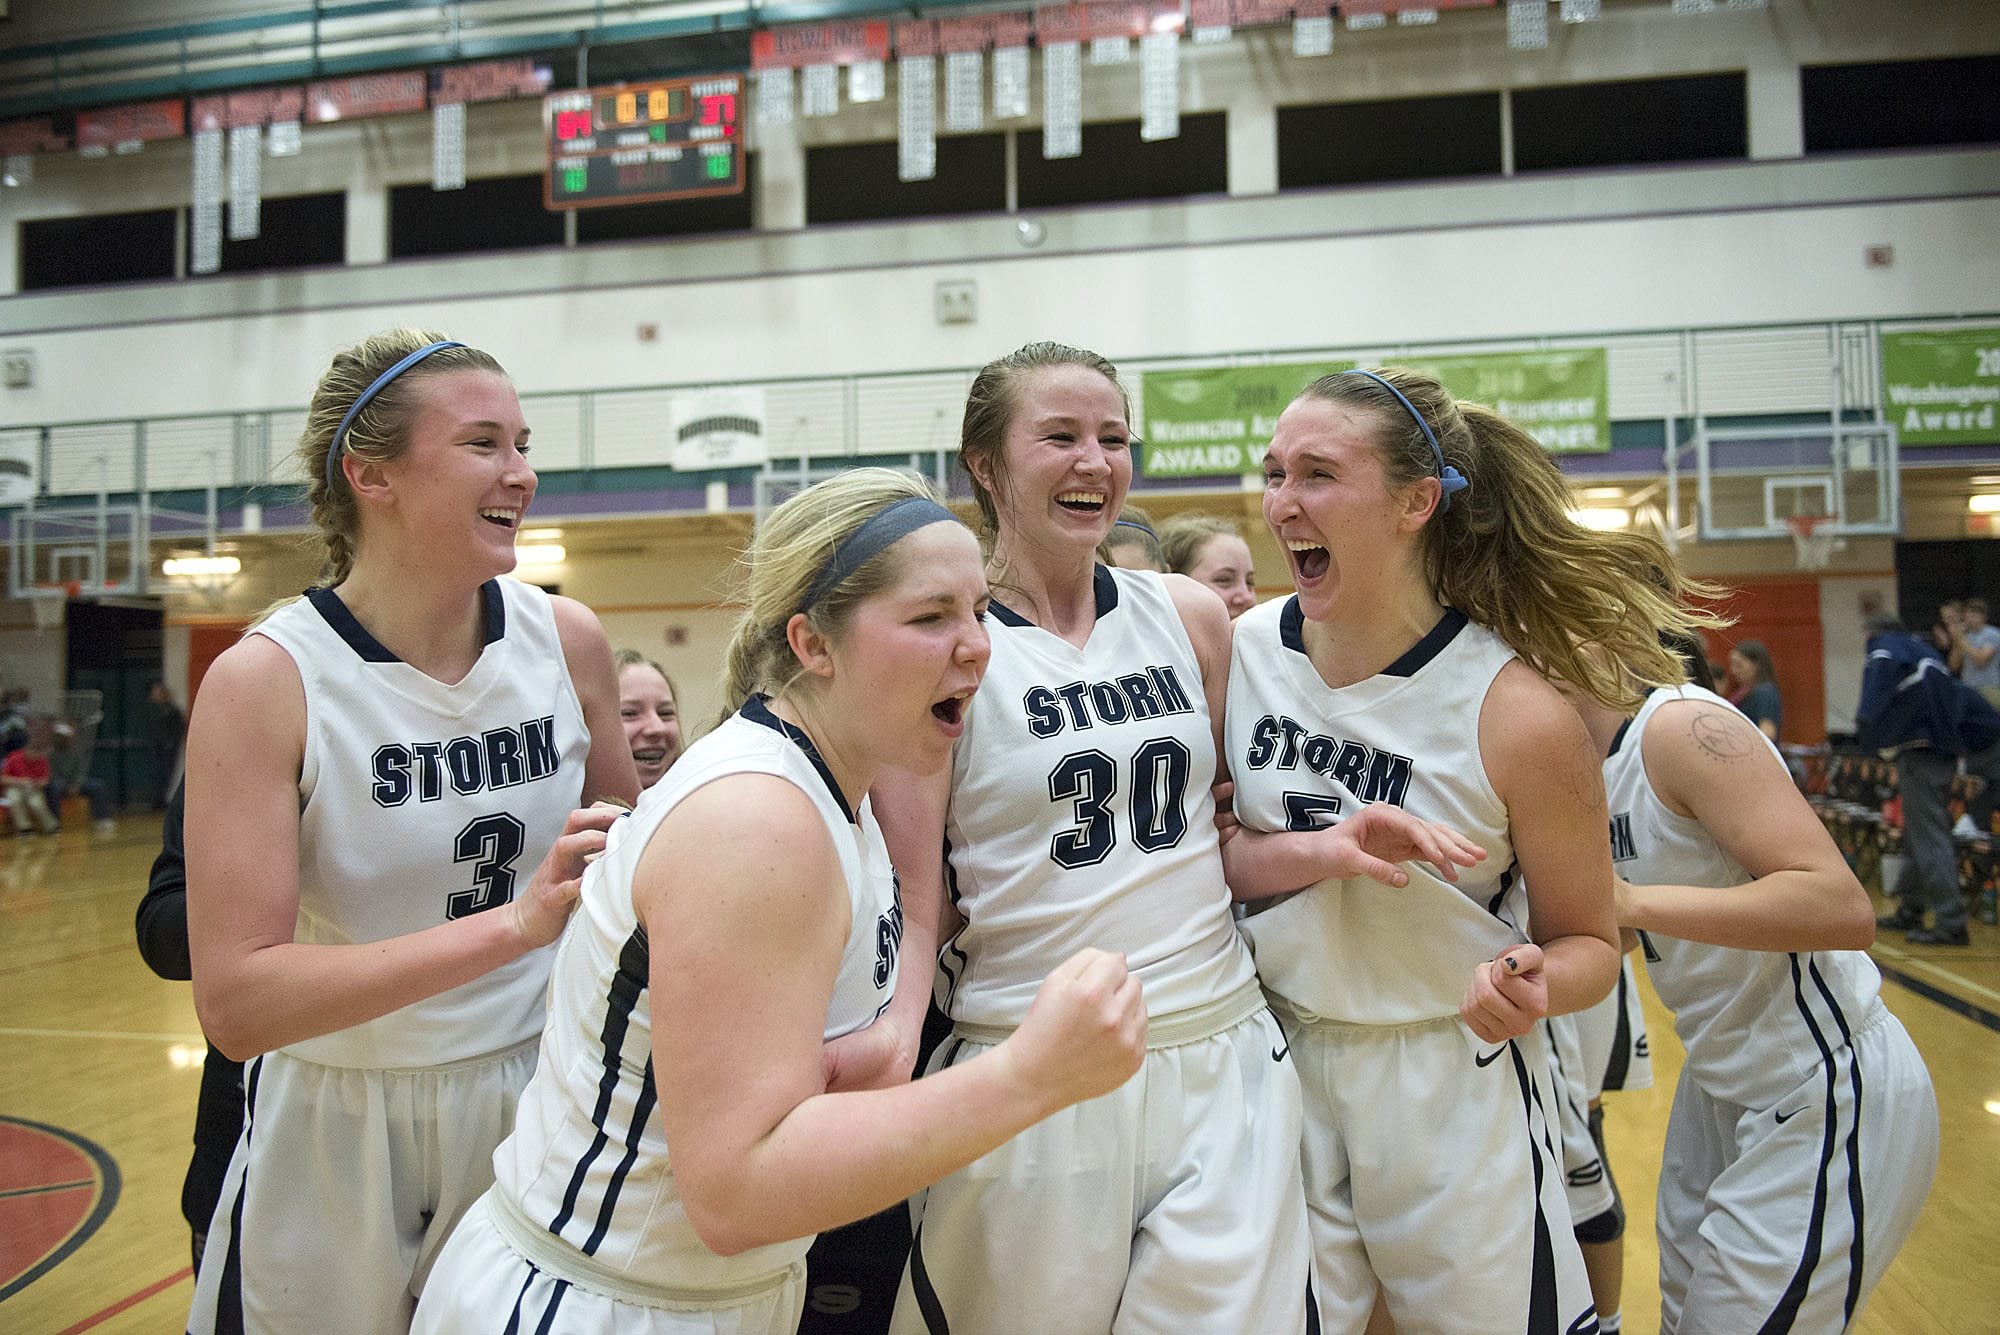 Members of the Skyview girls basketball team celebrate their win over Bellarmine on Friday night, Feb. 26, 2016 at Battle Ground High School.